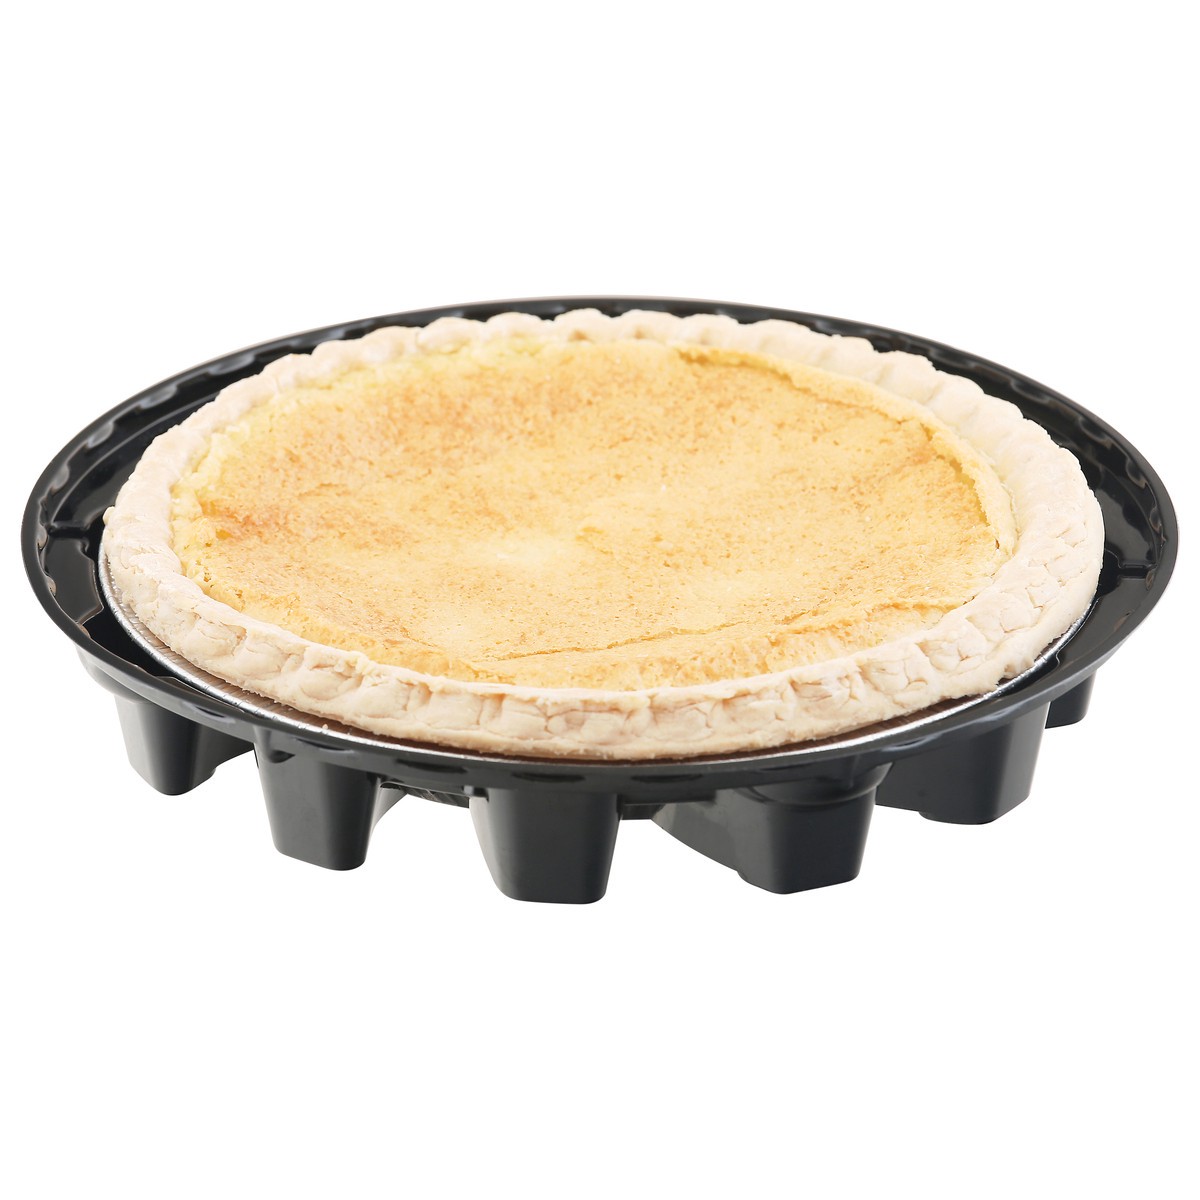 slide 11 of 11, Quality Bakery Products 8 Inch Buttermilk Chess Pie 23 oz Tray, 22 oz